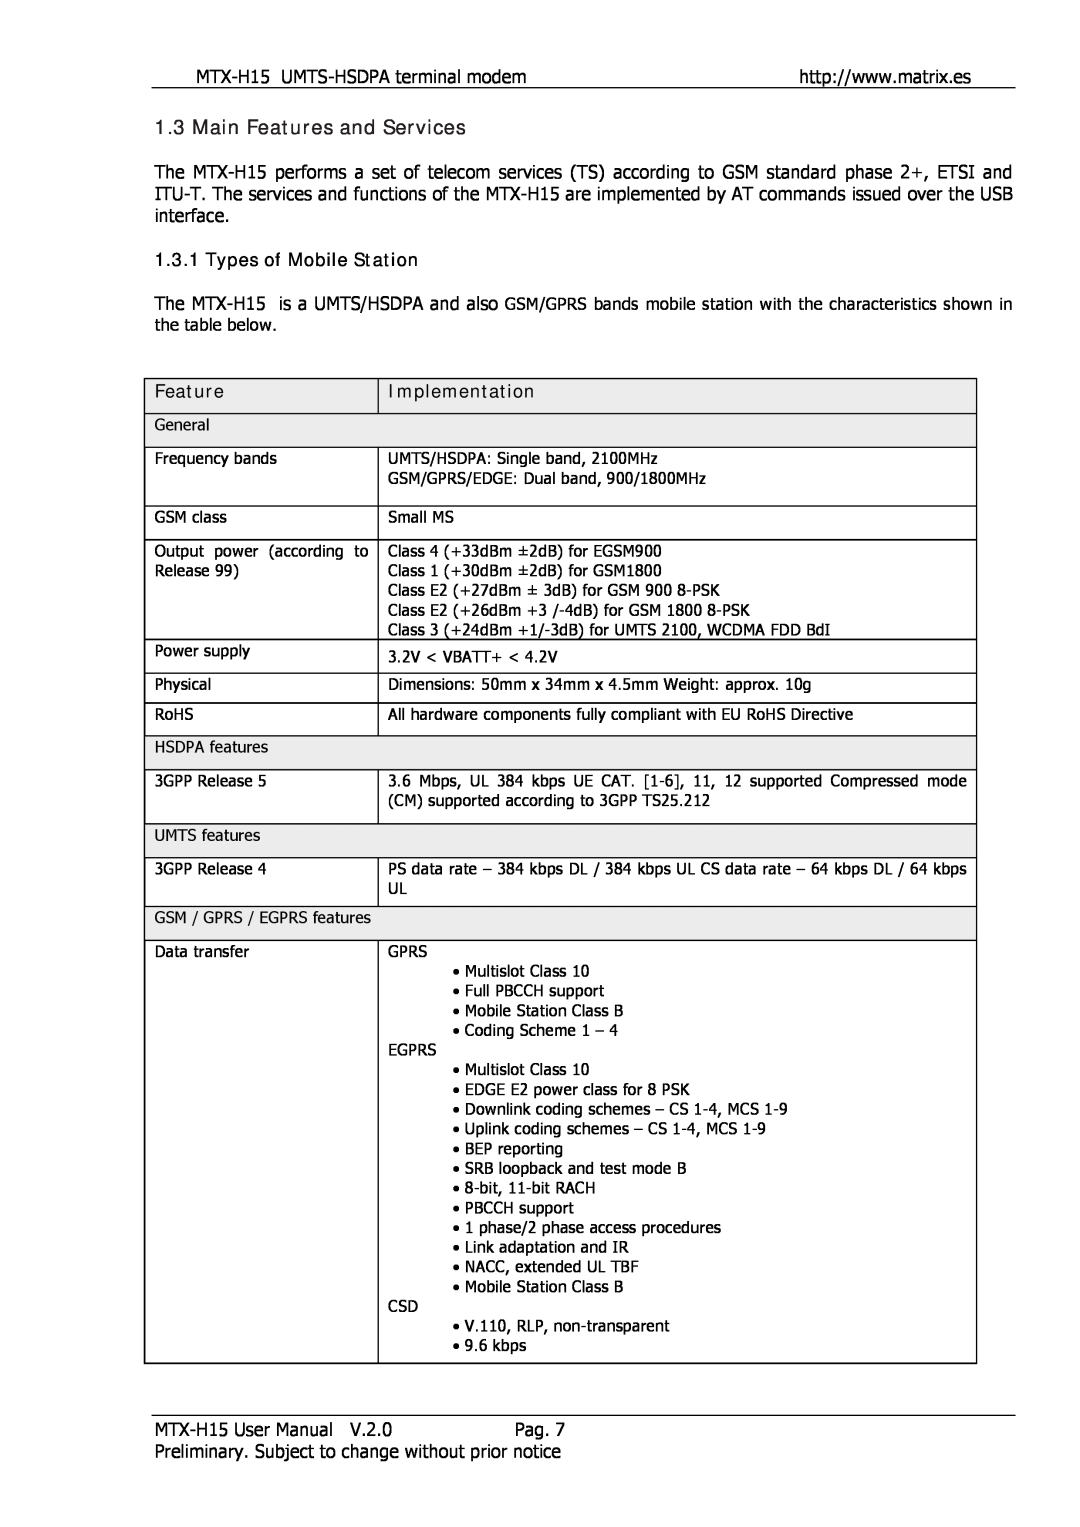 Siemens MTX-H15 user manual Main Features and Services, Types of Mobile Station, Implementation 